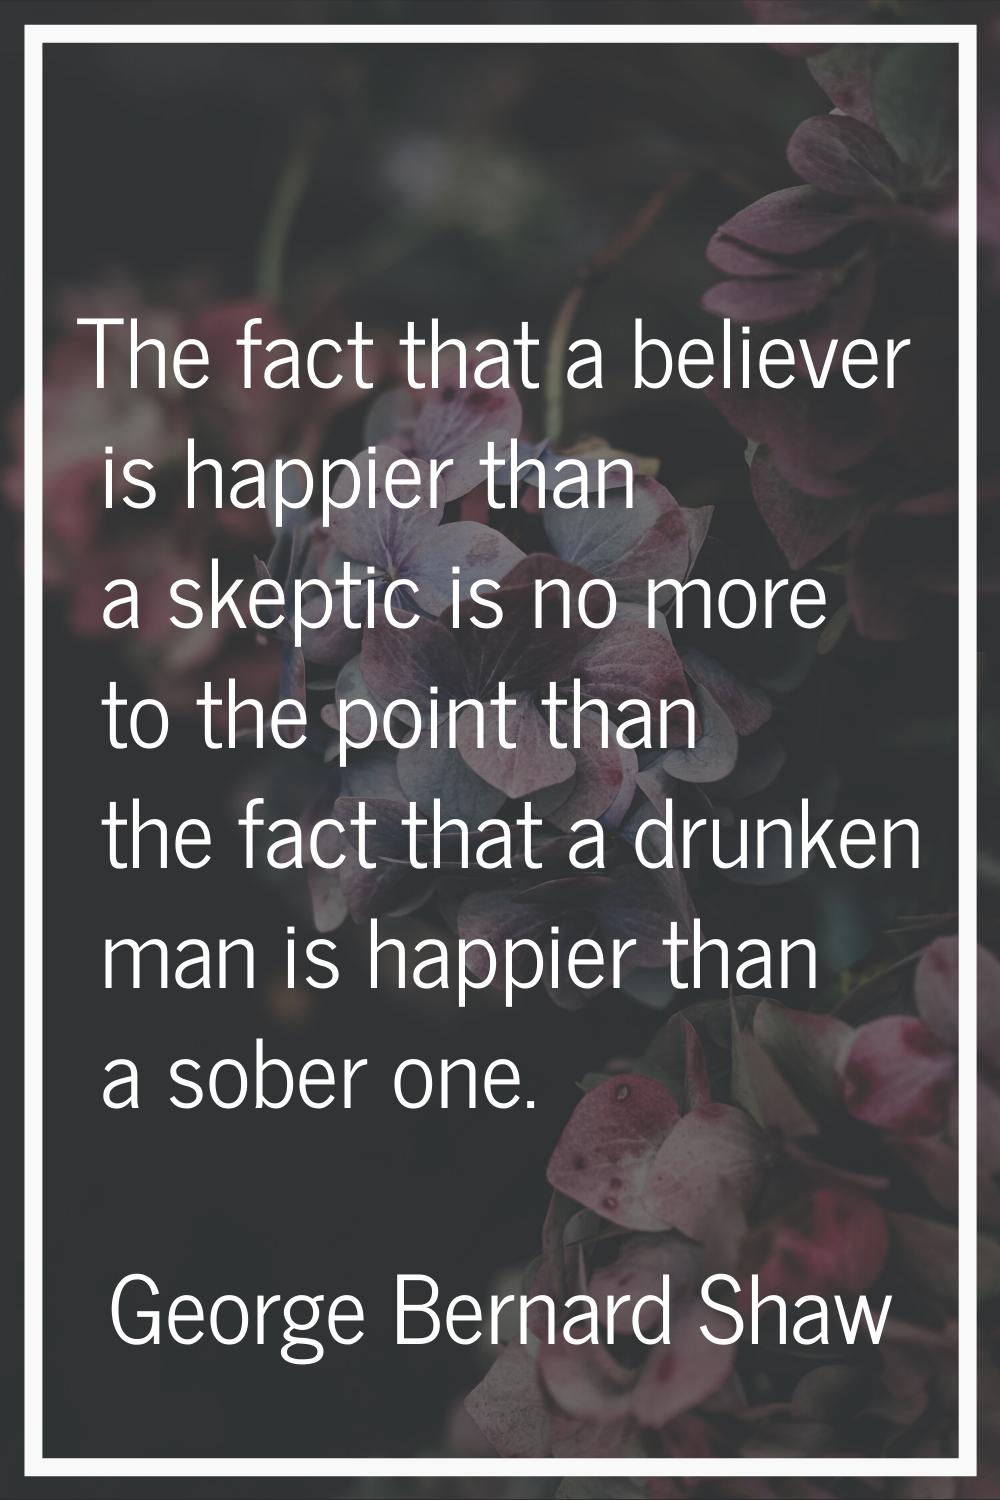 The fact that a believer is happier than a skeptic is no more to the point than the fact that a dru